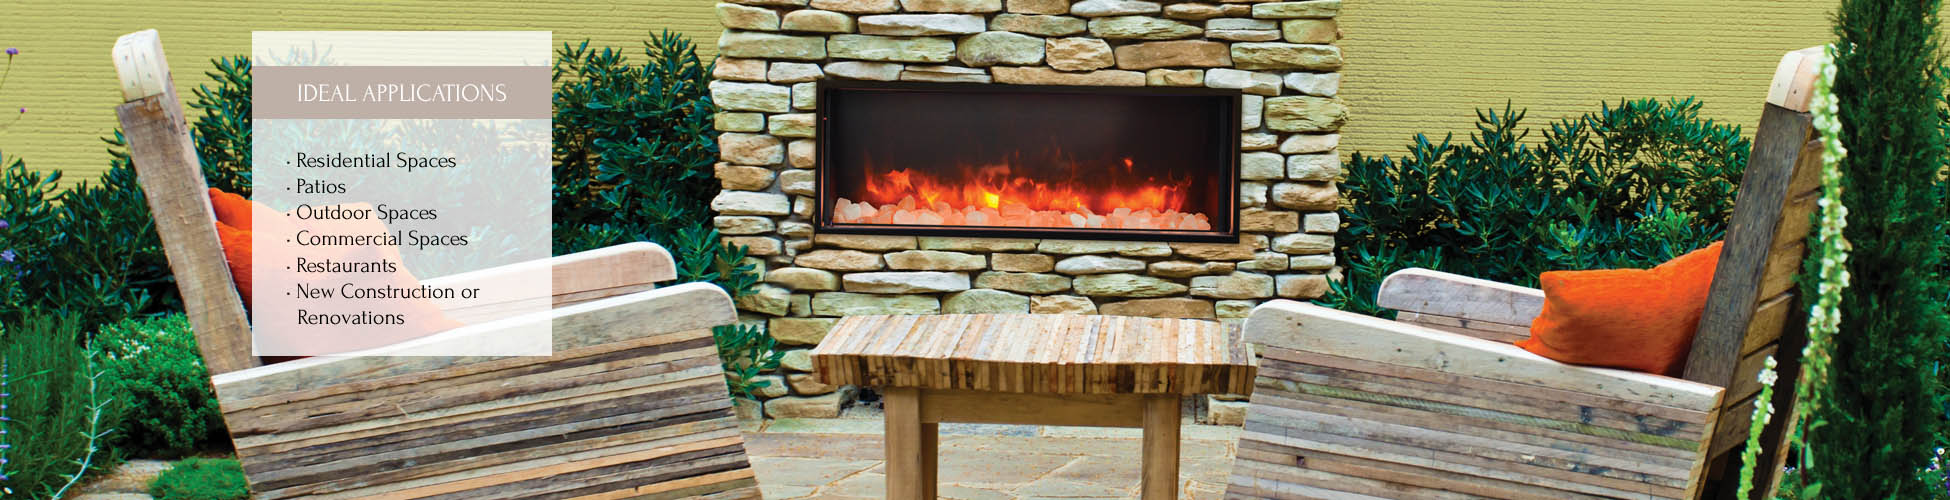 Sierra Flame outdoor electric fireplace